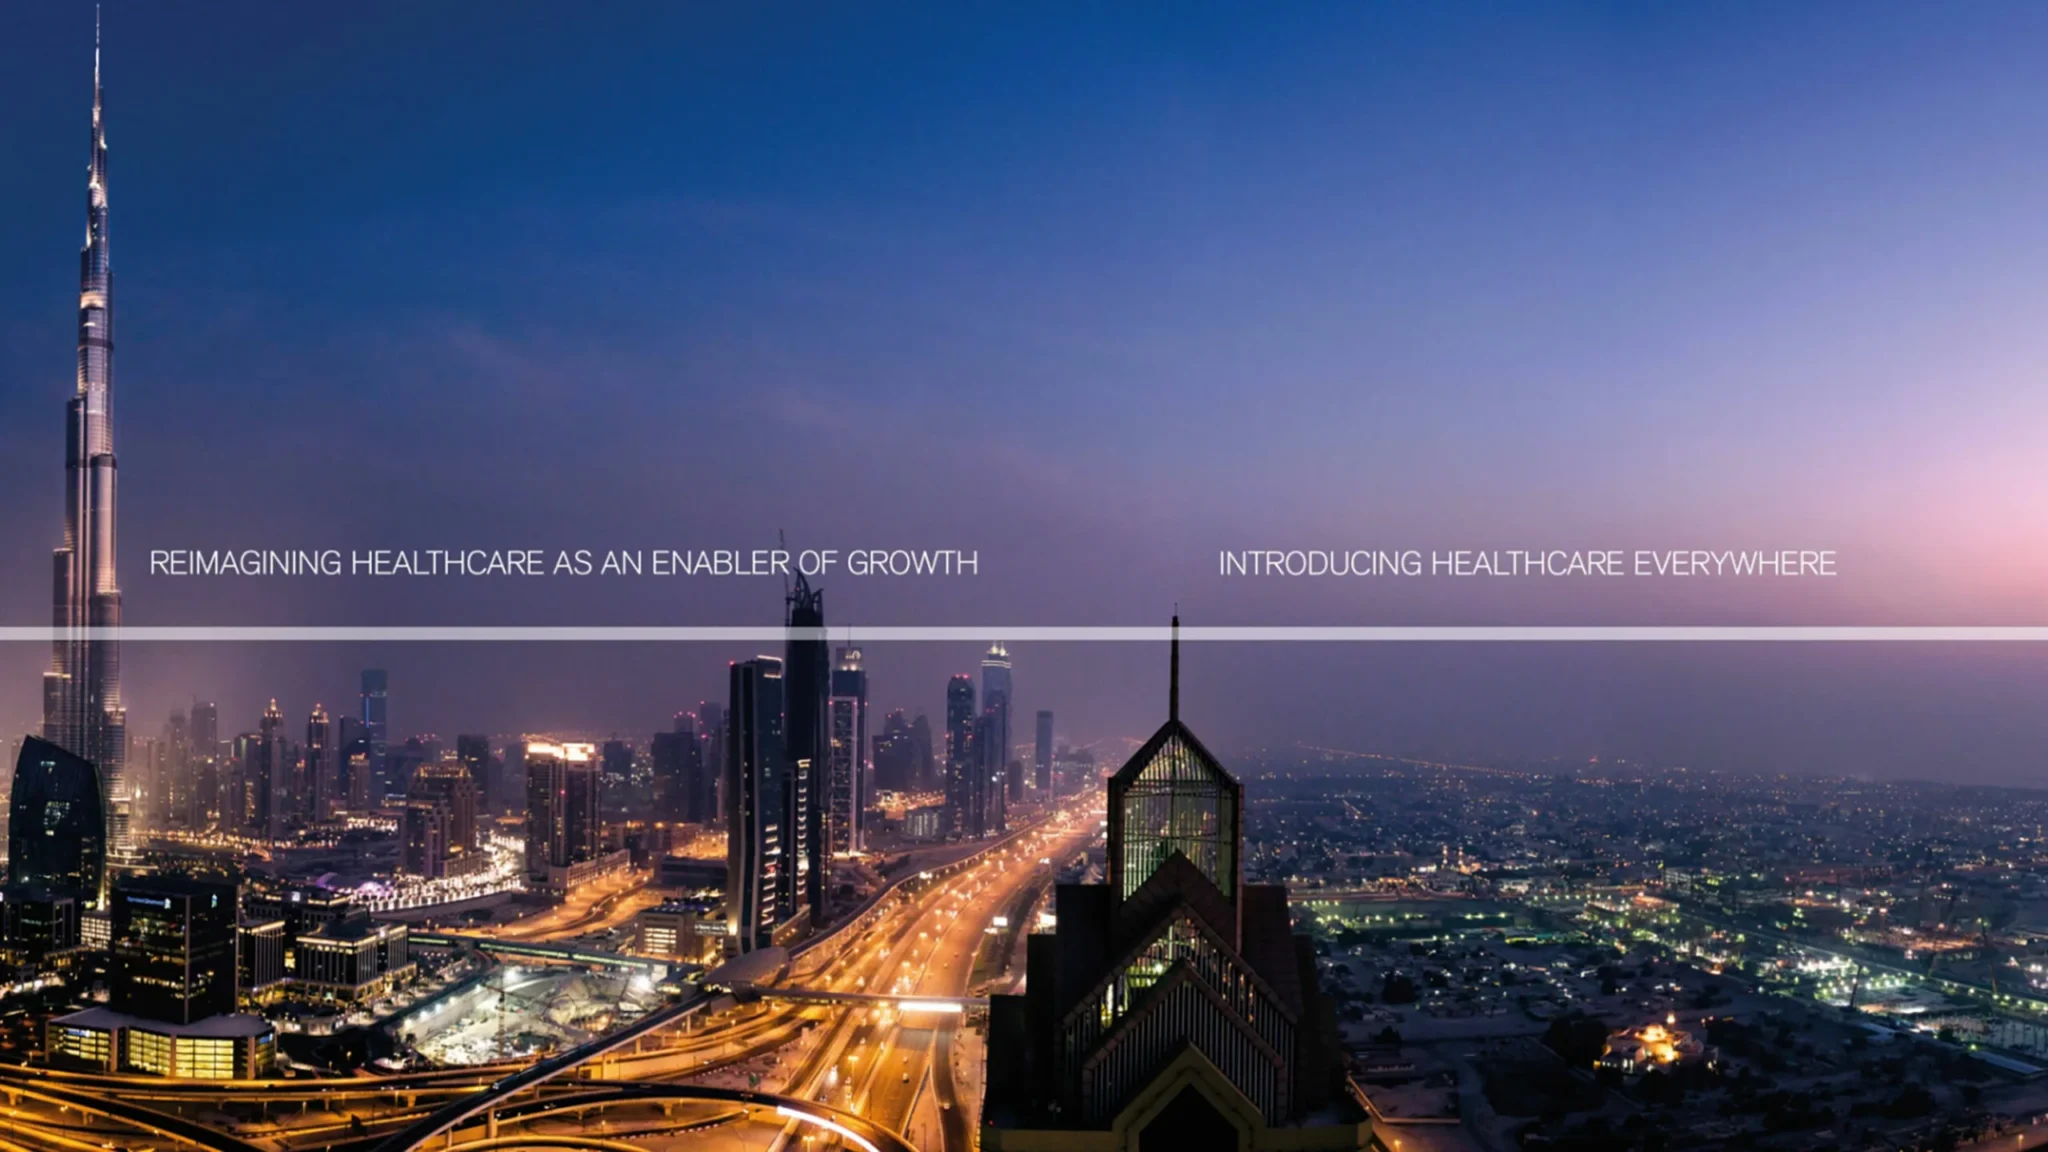 united healthcare global header image of a cityskyline with the text: reimagining healthcare as an enabler of growth, introducing healthcare everywhere.